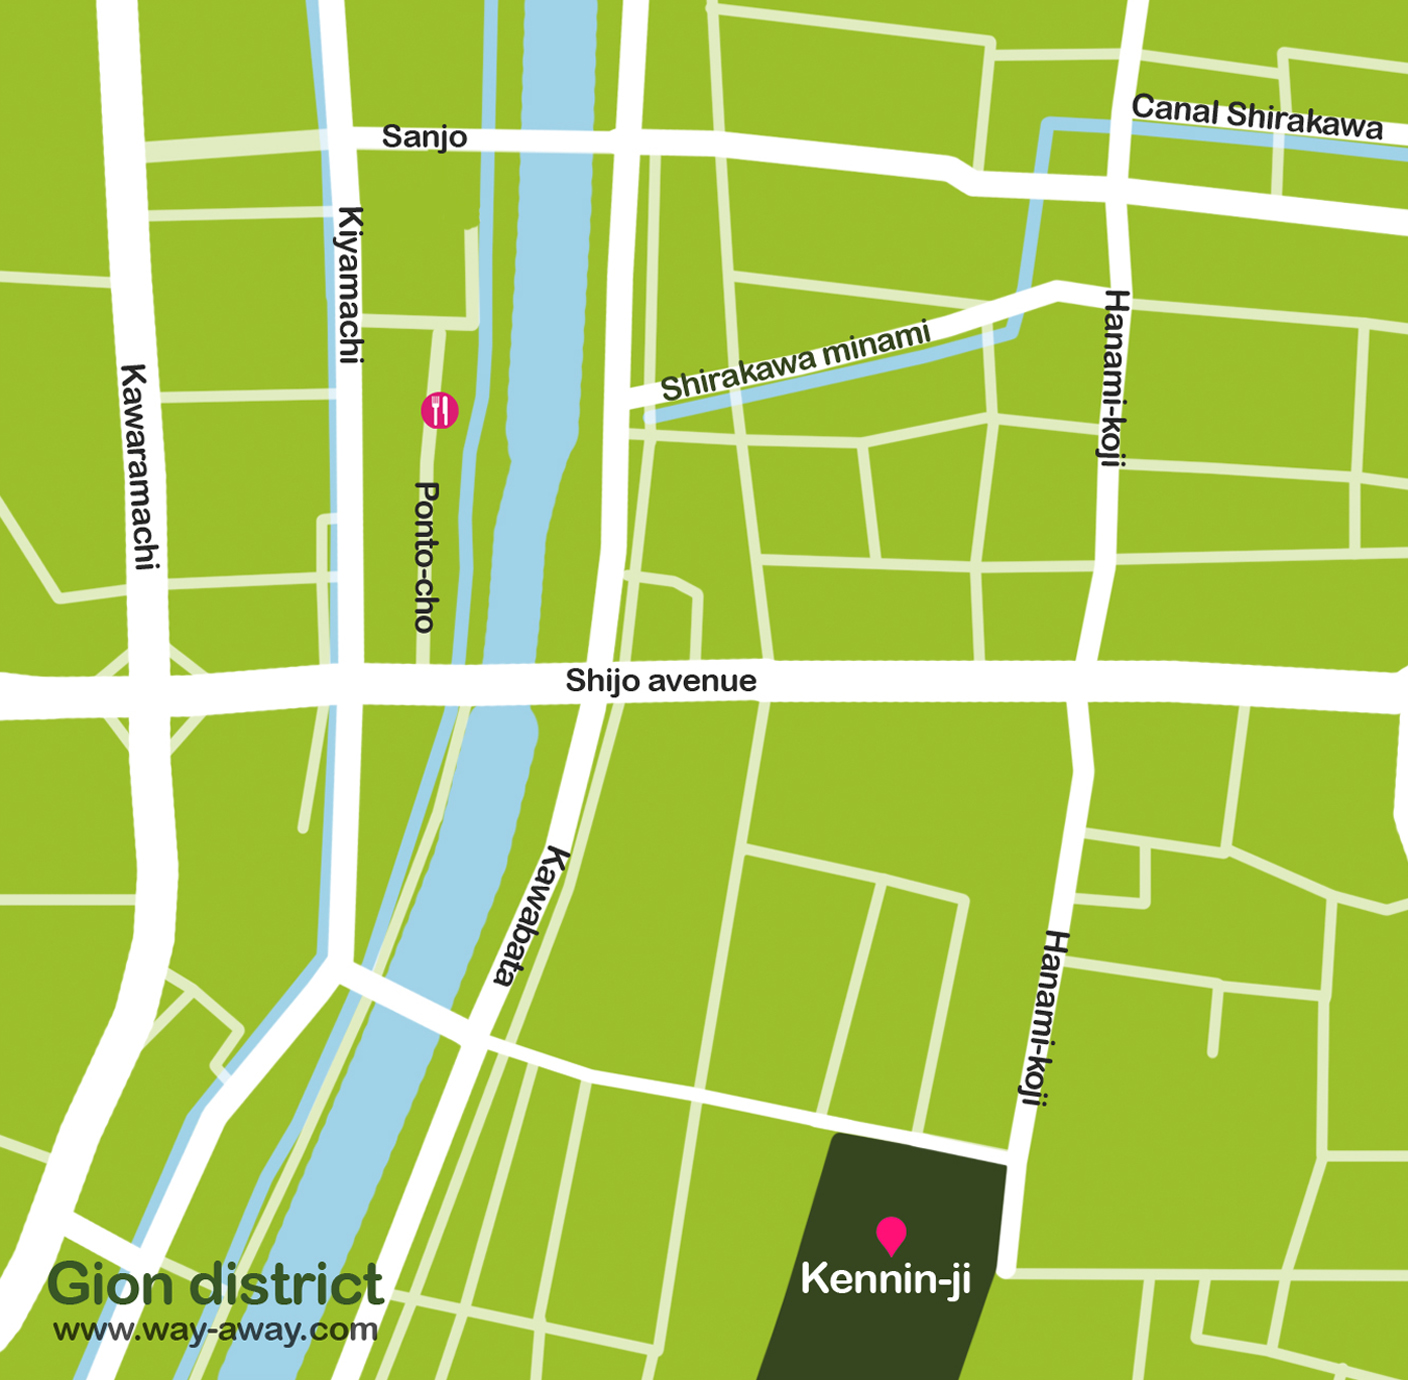 Map of Kyoto: Gion district #onlyen